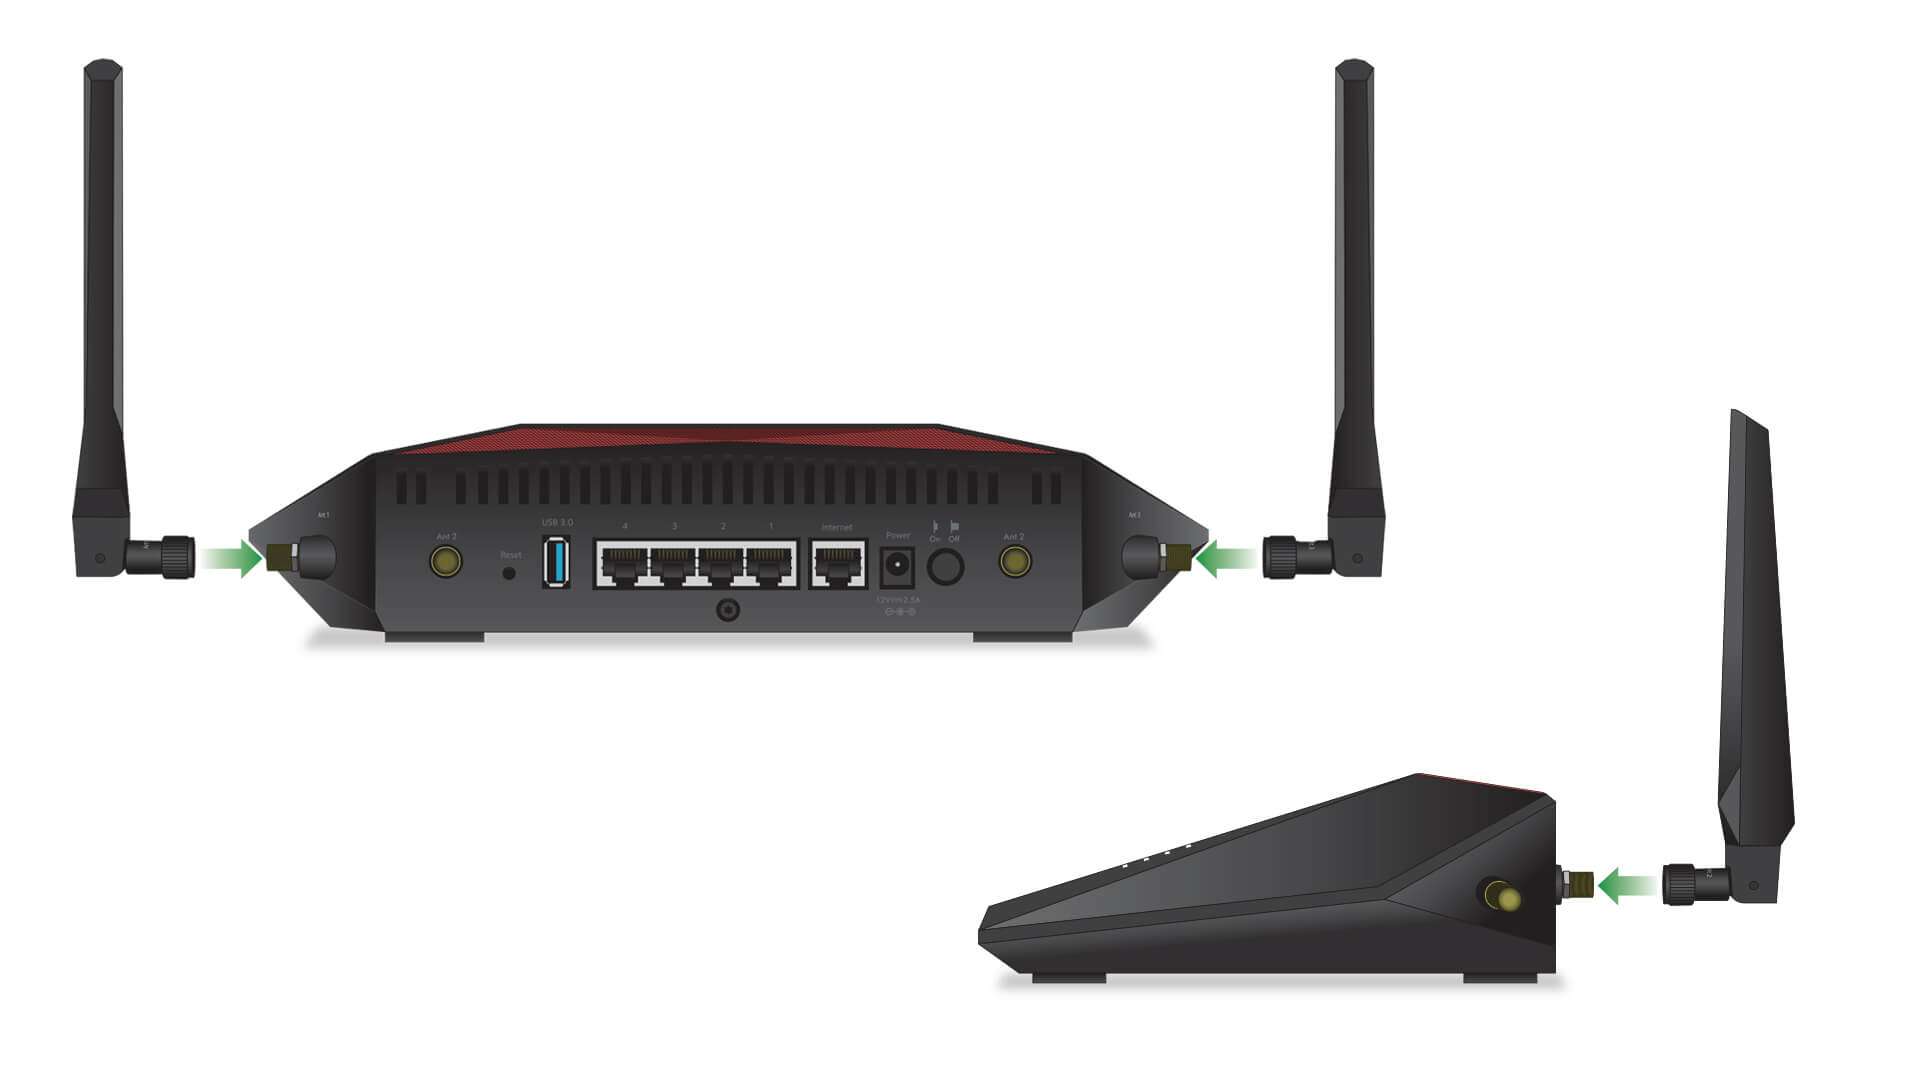 Attach the four antennas to your router